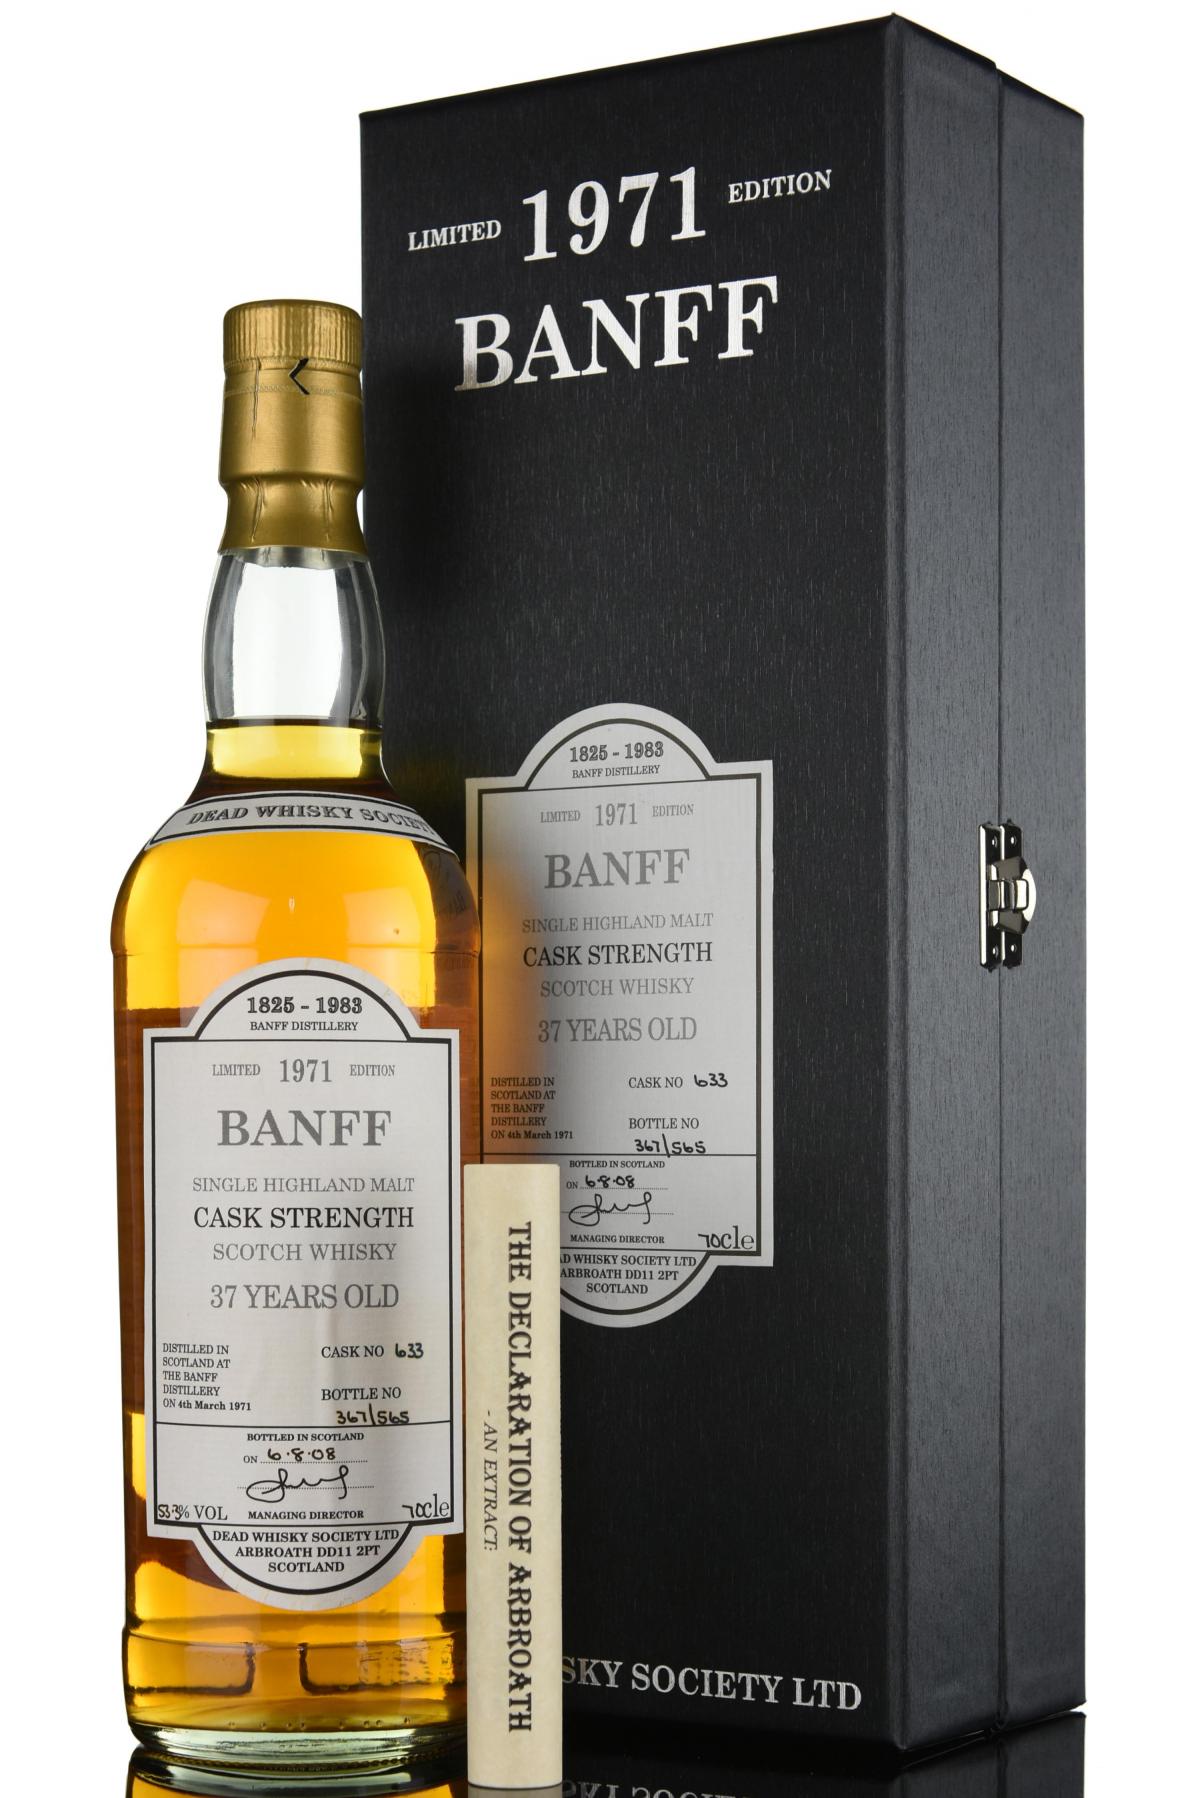 Banff 1971-2008 - 37 Year Old - Dead Whisky Society